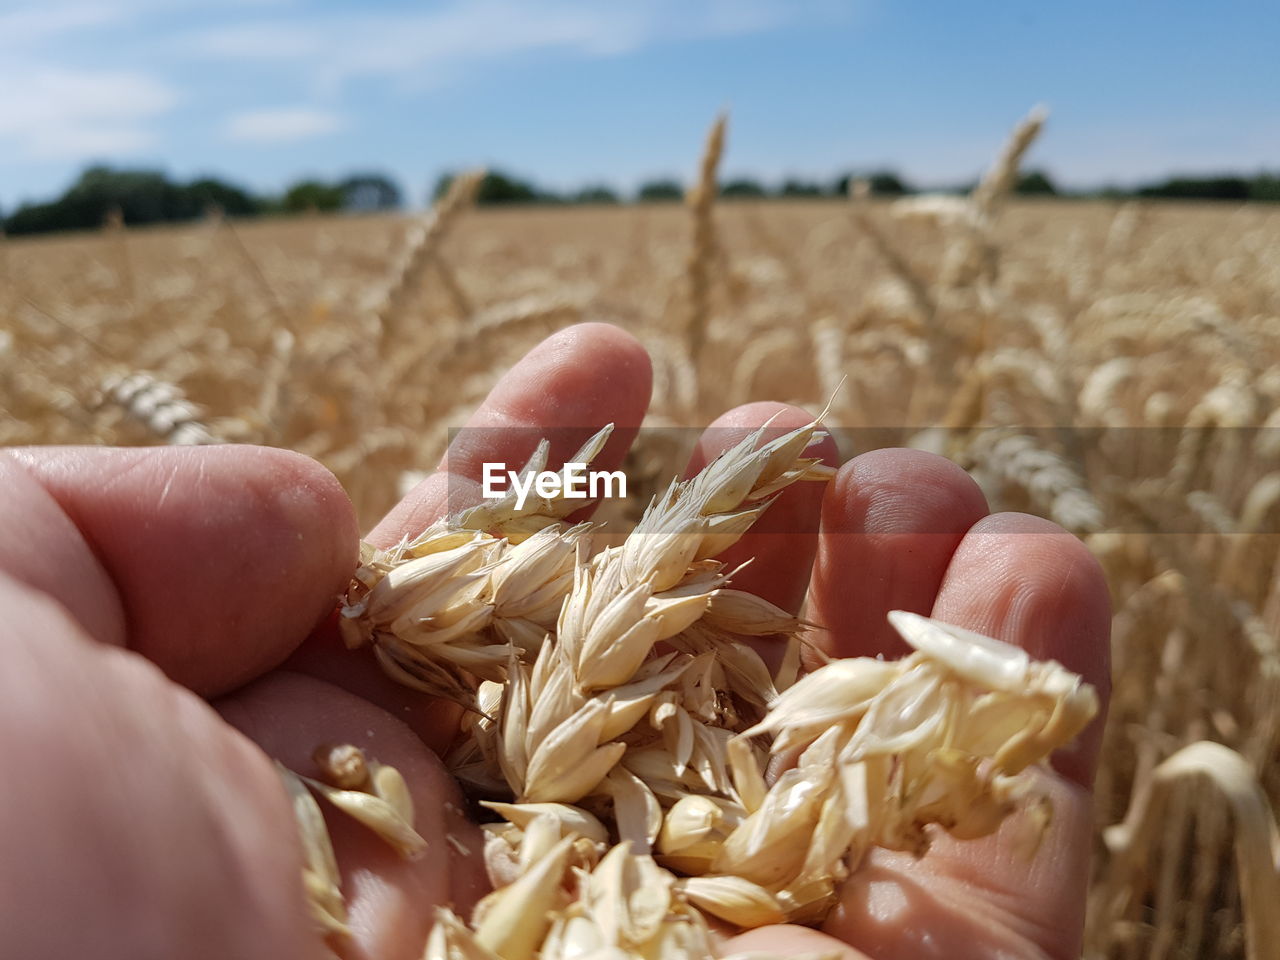 CLOSE-UP OF HUMAN HAND HOLDING WHEAT